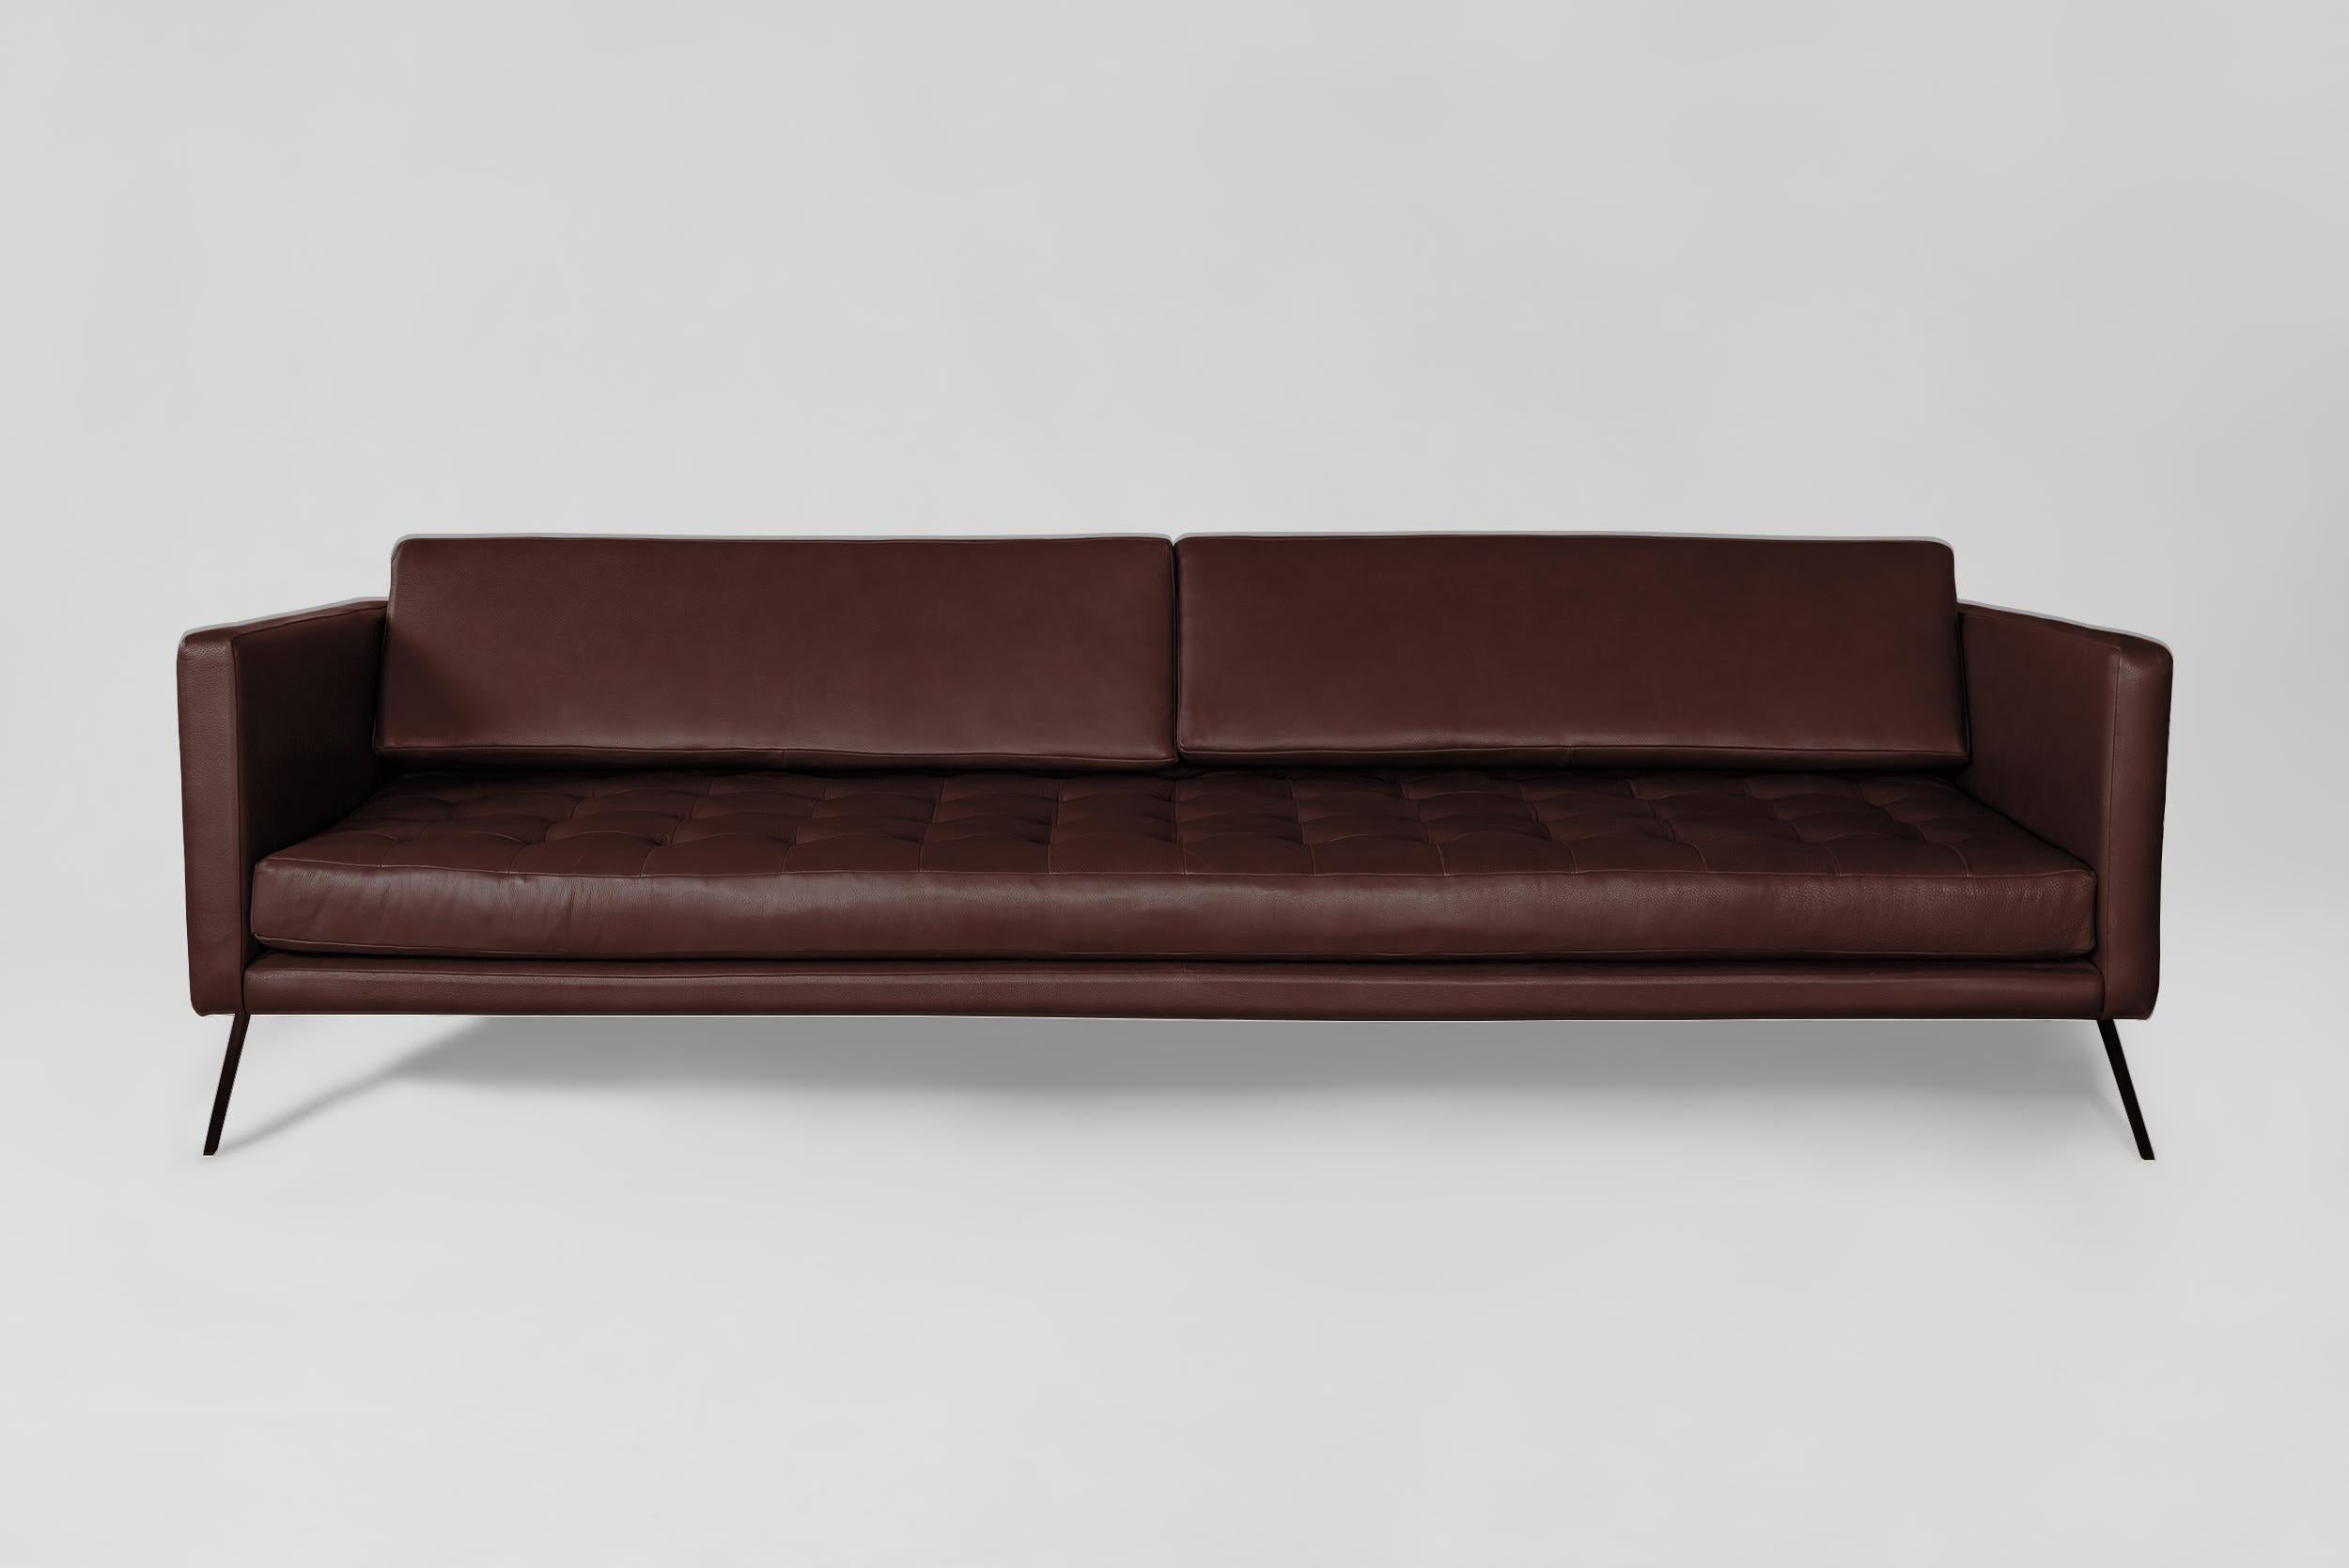 The Mantis sofa Tuffed Fabric Upholstery and steel legs

L 240.0cm/94.4”
W 92.0cm/36.2”
H 74.0cm/29.1”
Seat height 42.0cm/16.5”

Also available in fabric. Price quoted for Grade in Fabric version.